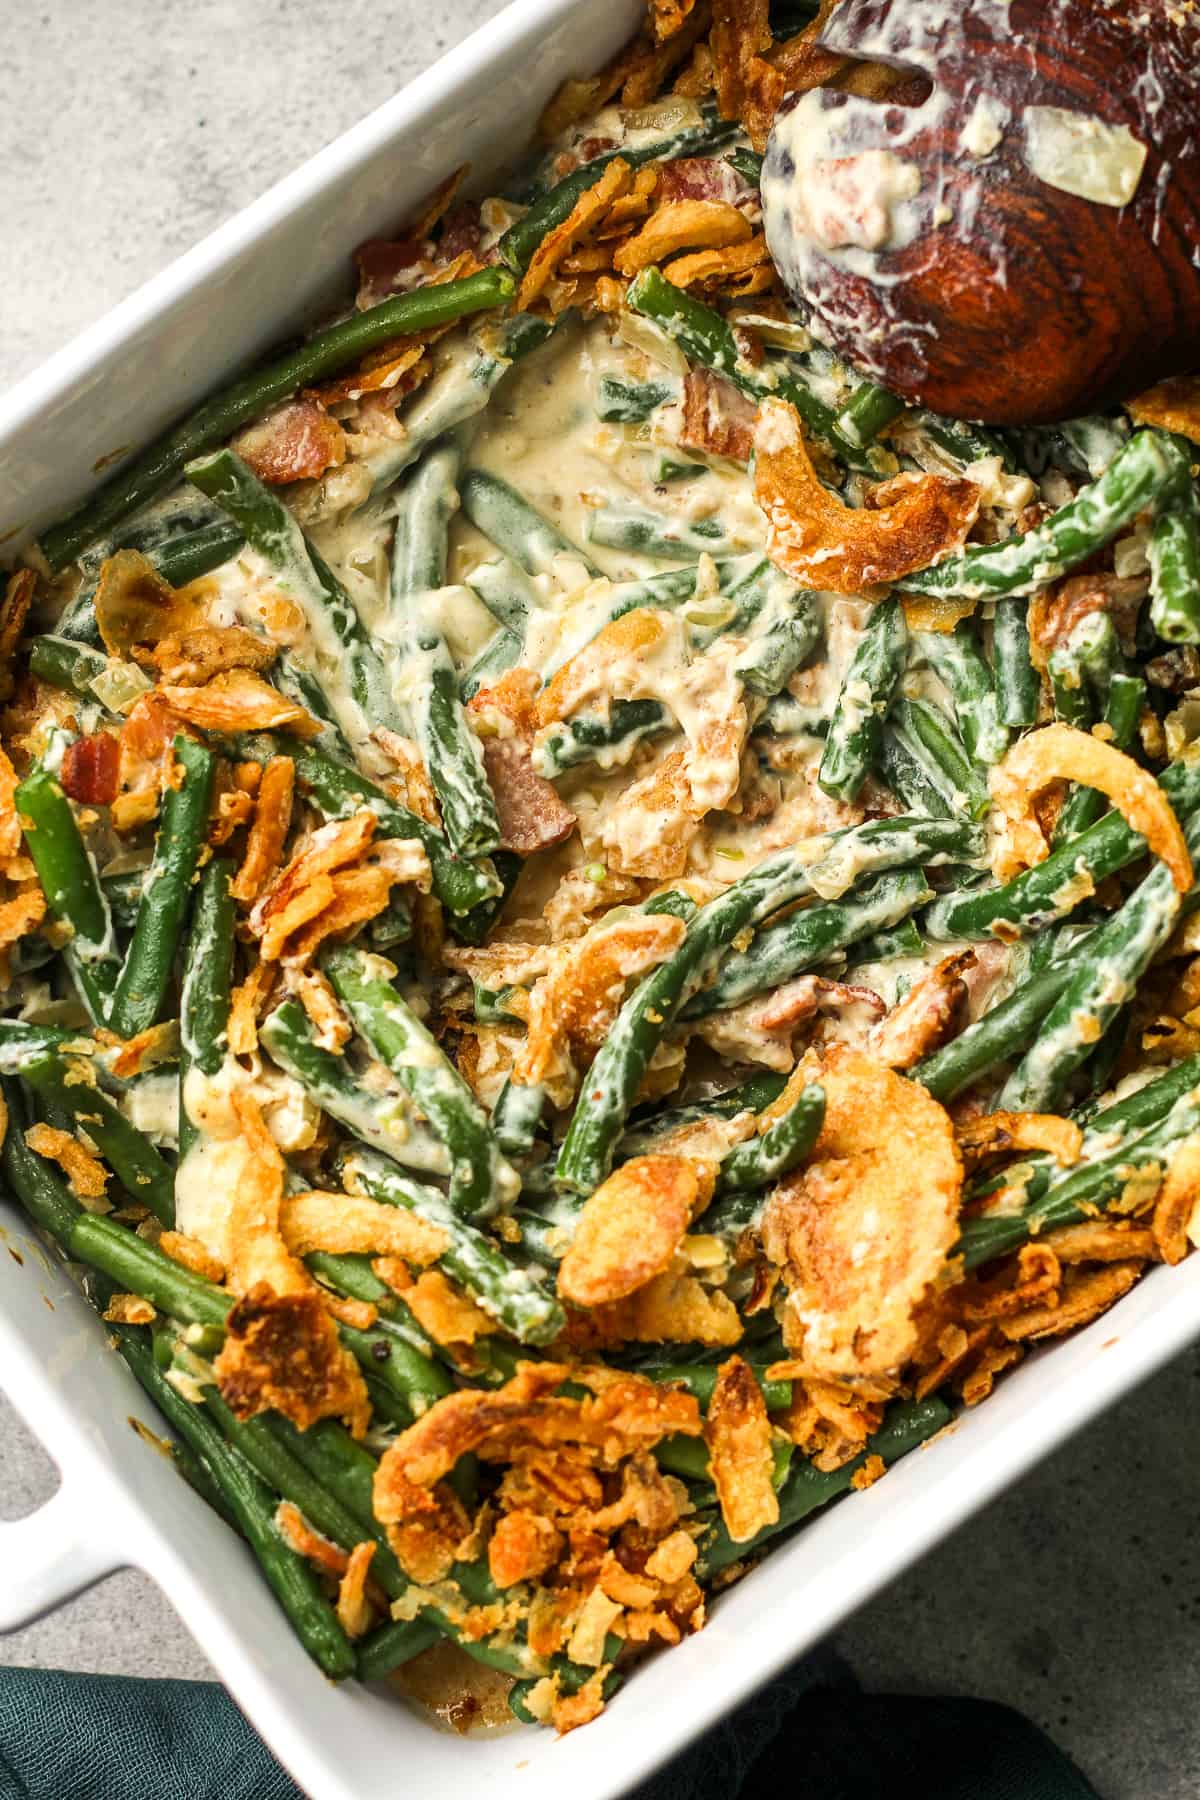 Closeup view of a casserole dish with green bean casserole with a spoonful removed.